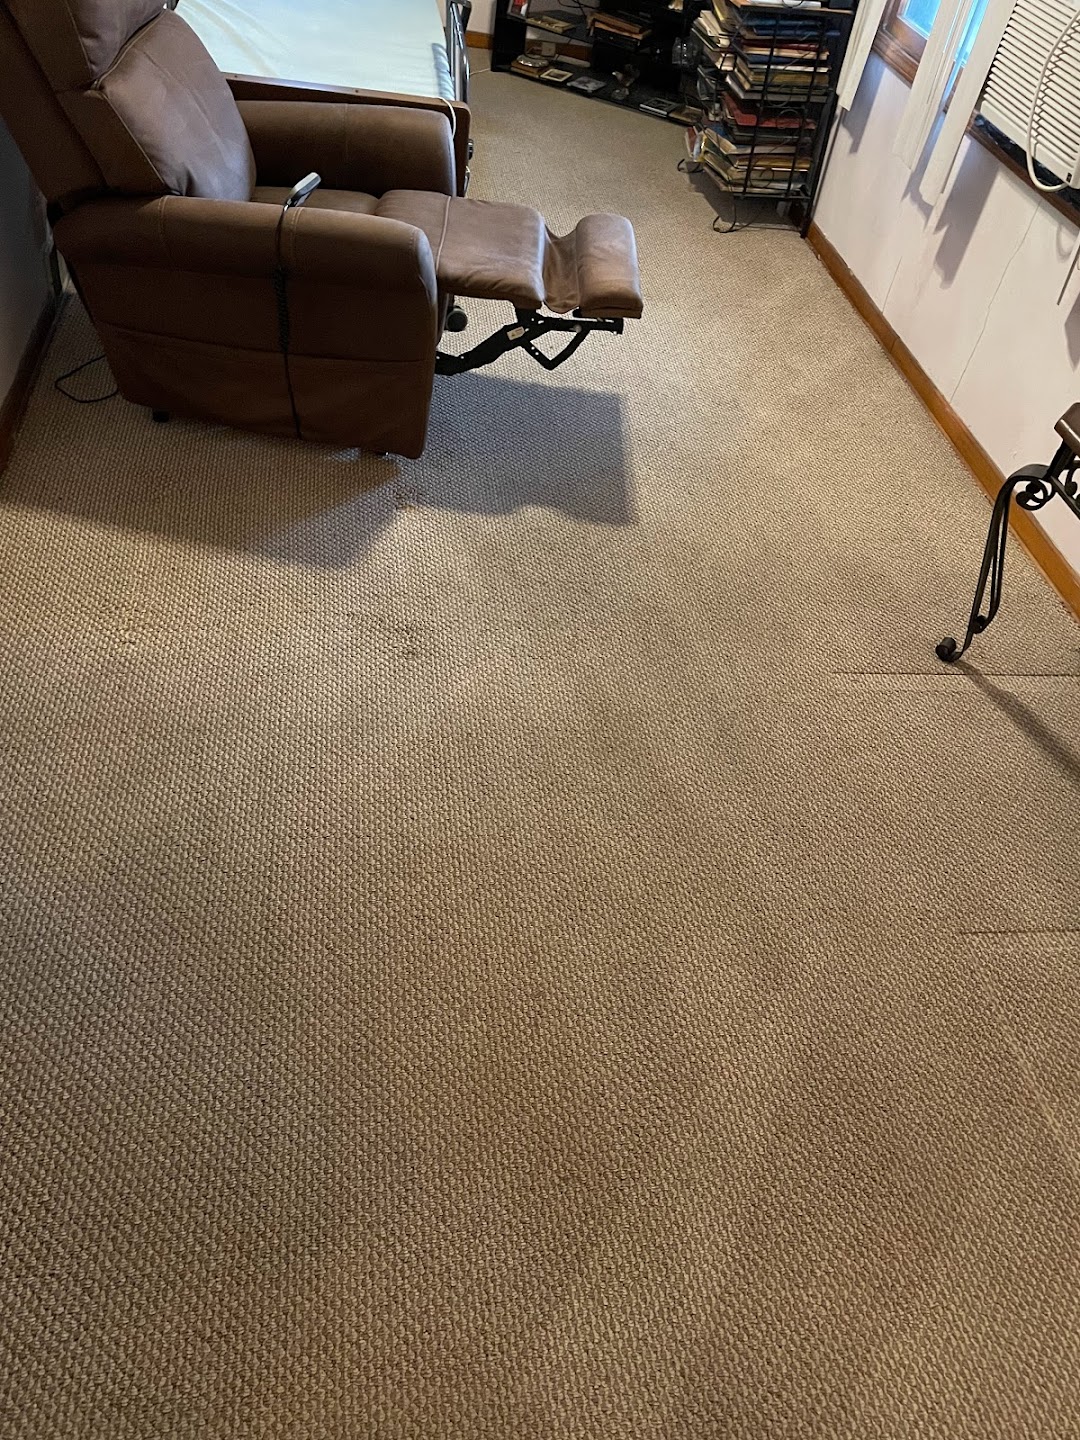 USA Carpet Cleaning Pros